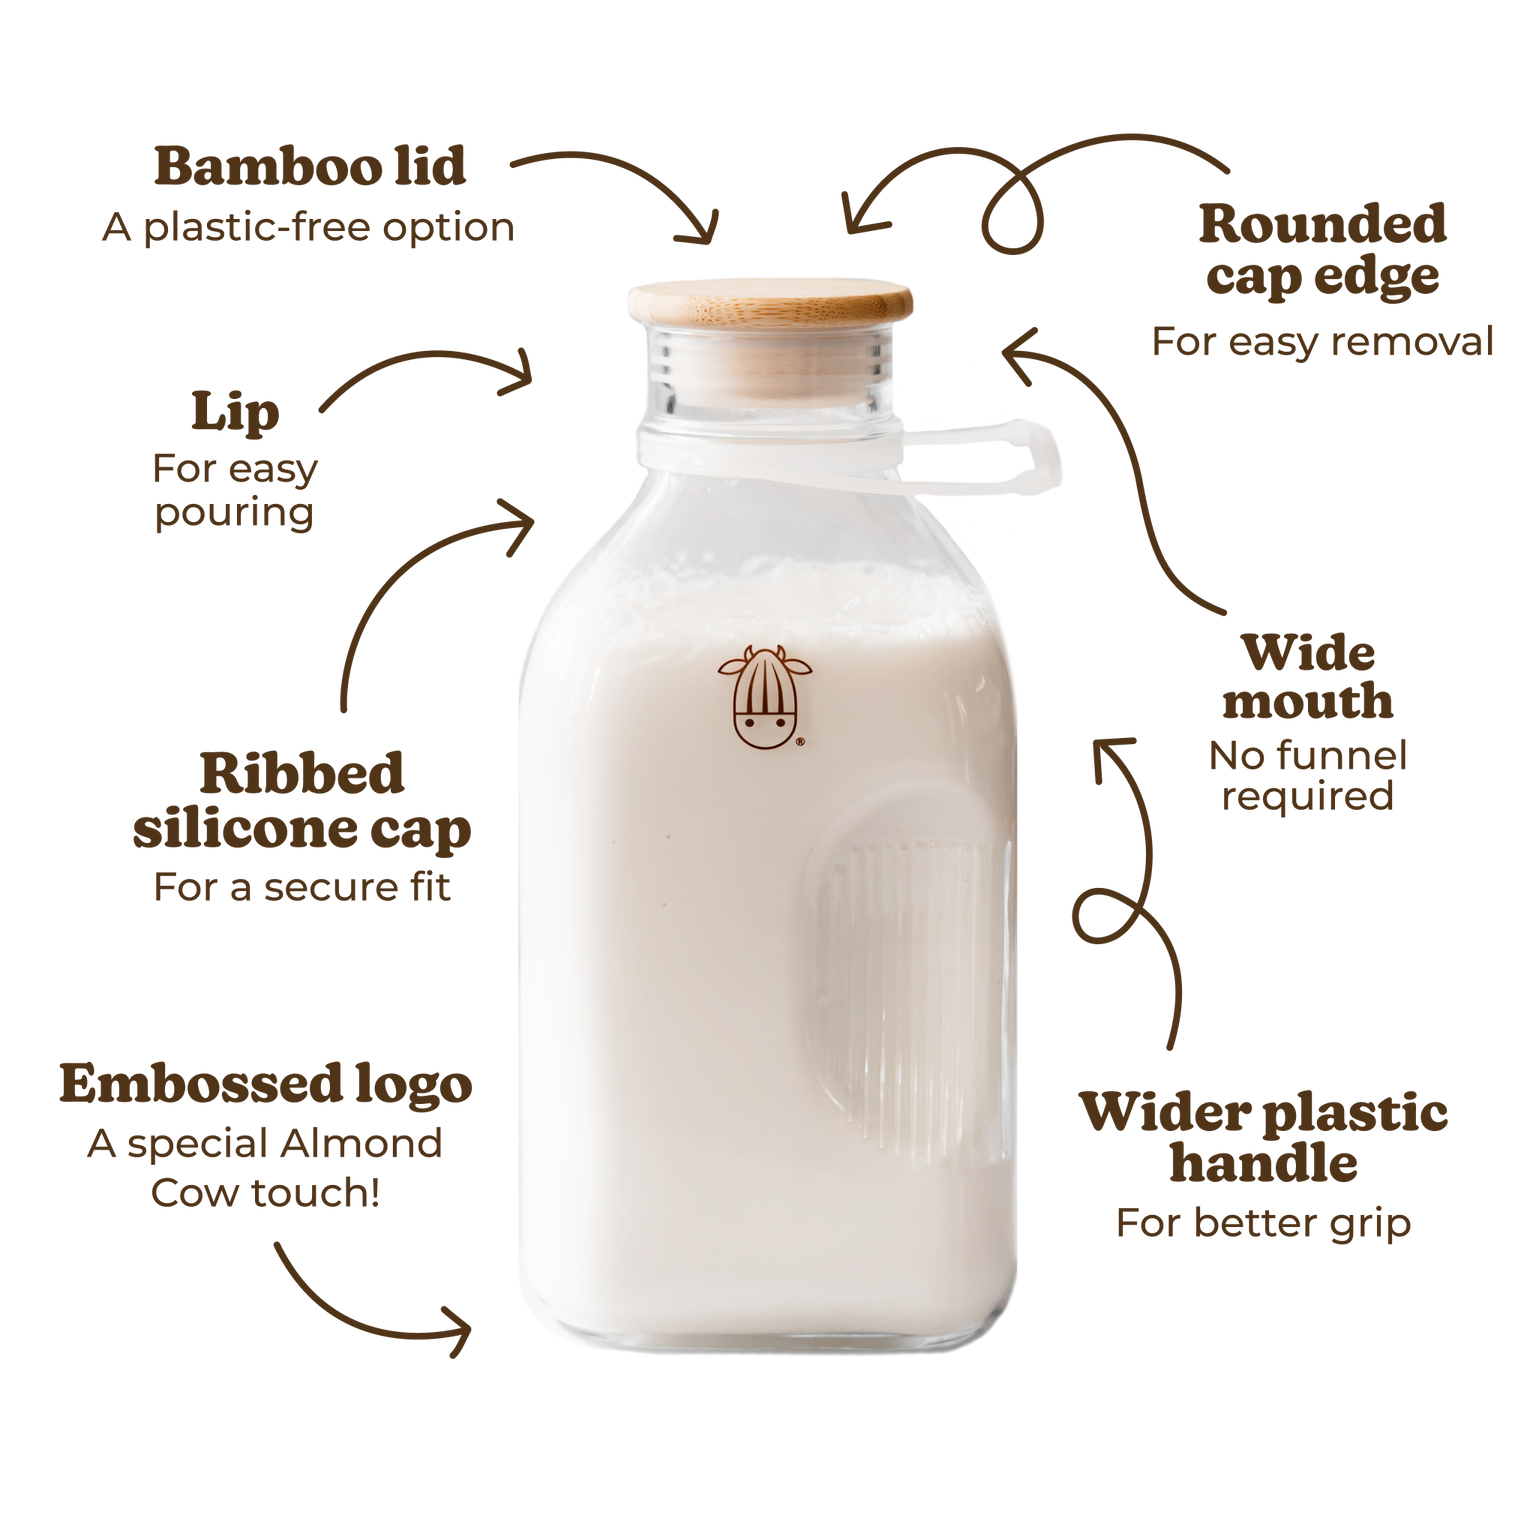 Almond Cow - Glass Bottle Milk Container for Refrigerator, 60 fl oz, Glass  Pitcher with Lid and Spout, Clear Milk Jug Glass Bottles, Food-Grade Glass  Liquid Container, 5 x 4 x 10 inches 